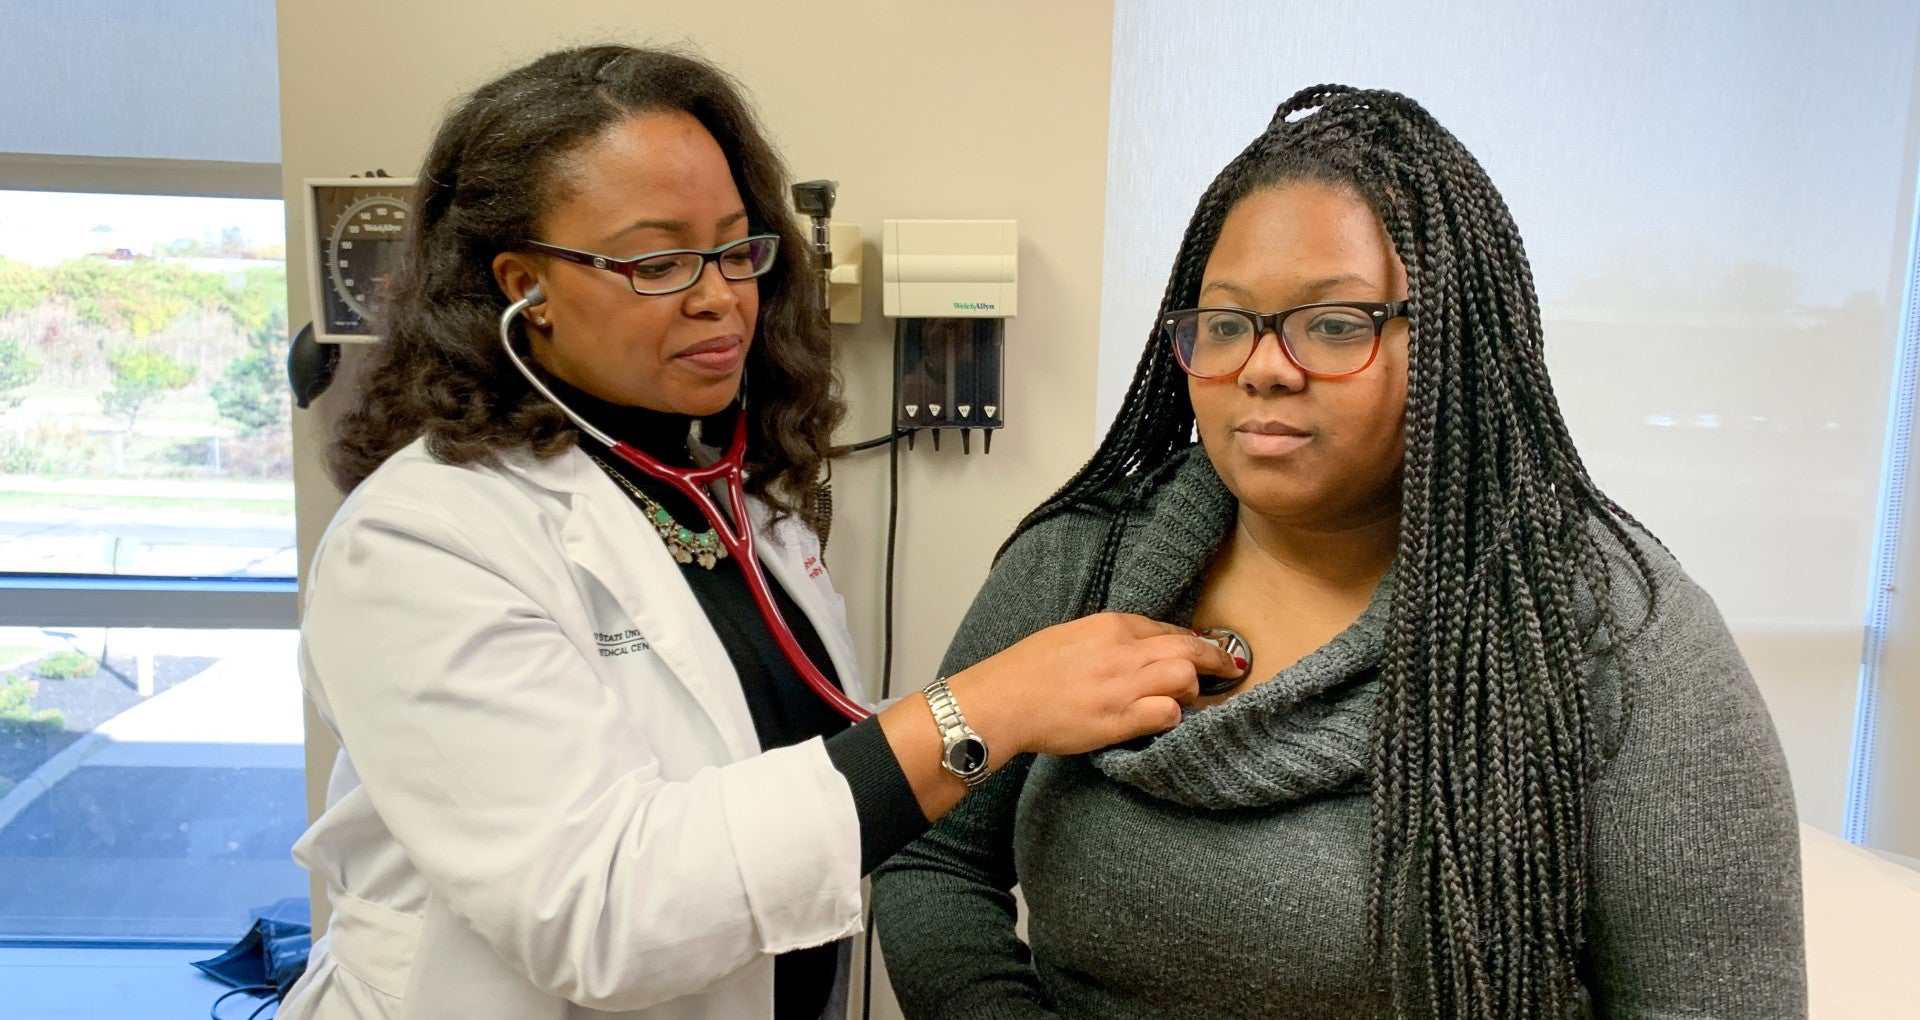 New Study Suggests Doctors Discuss Hair Care With Black Women To Reduce Barrier To Exercise